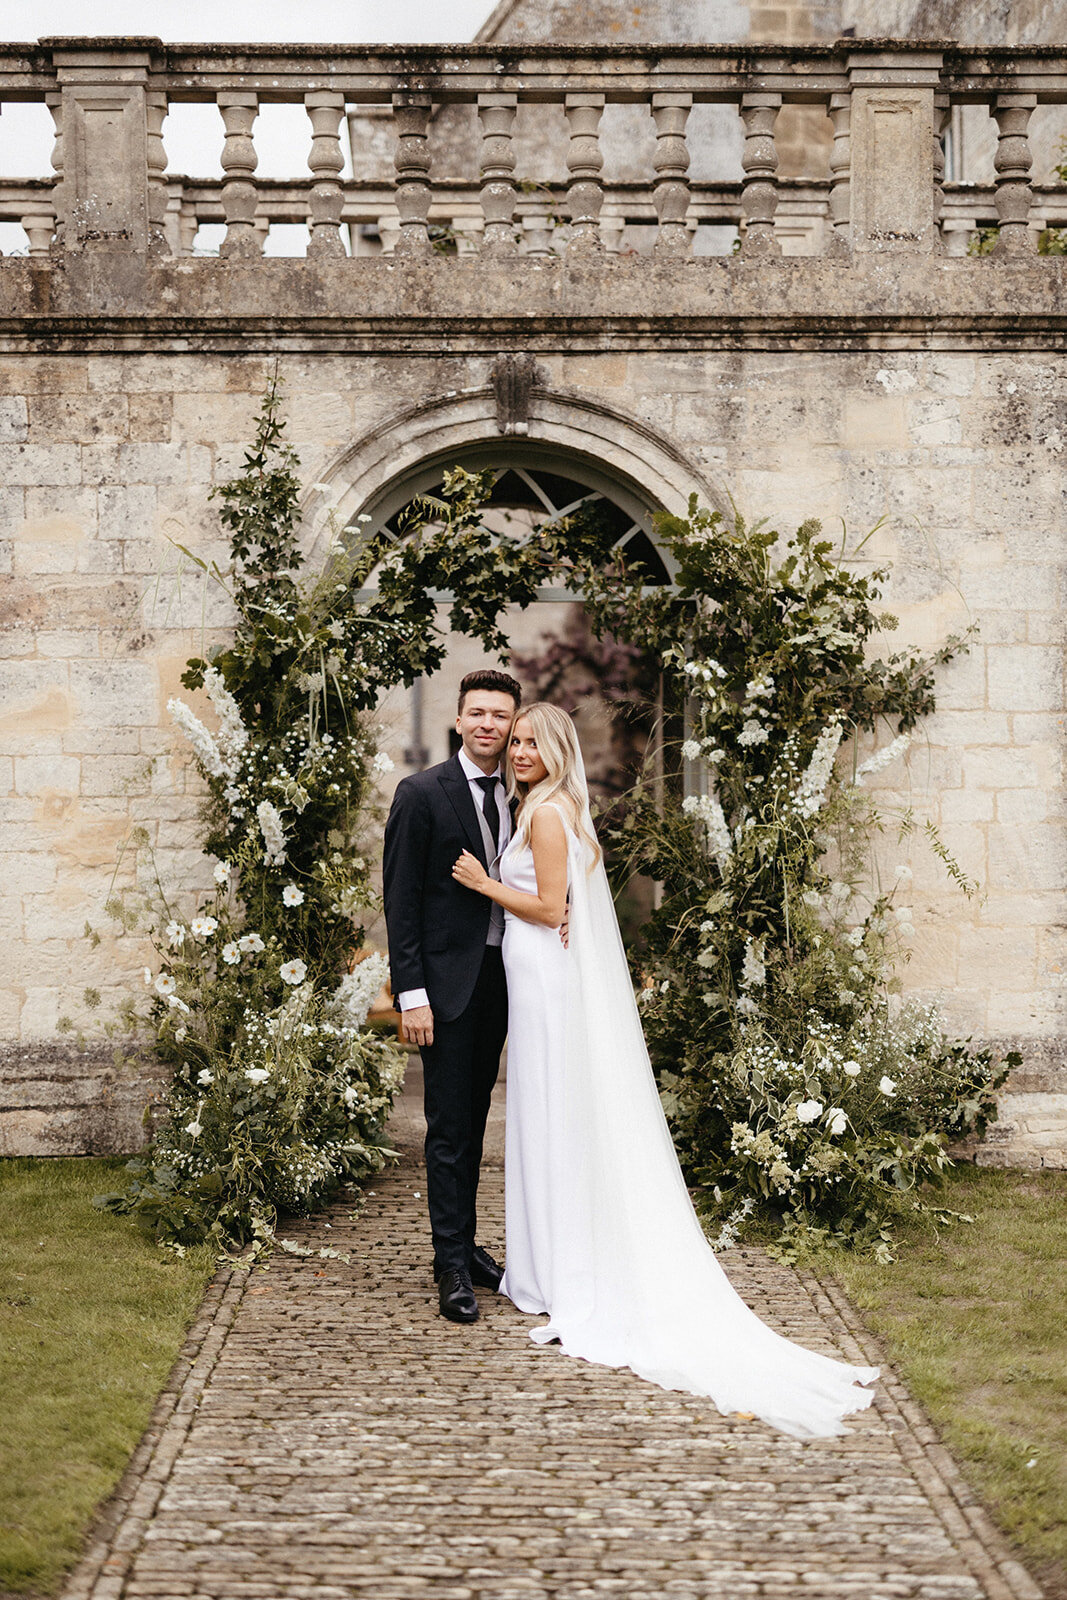 Attabara Studio UK Luxury Wedding Planners Private Estate Marquee Wedding with Rebecca Rees1 Attabara Studio UK Luxury Wedding Planners Private Estate Marquee Wedding with Rebecca Rees72